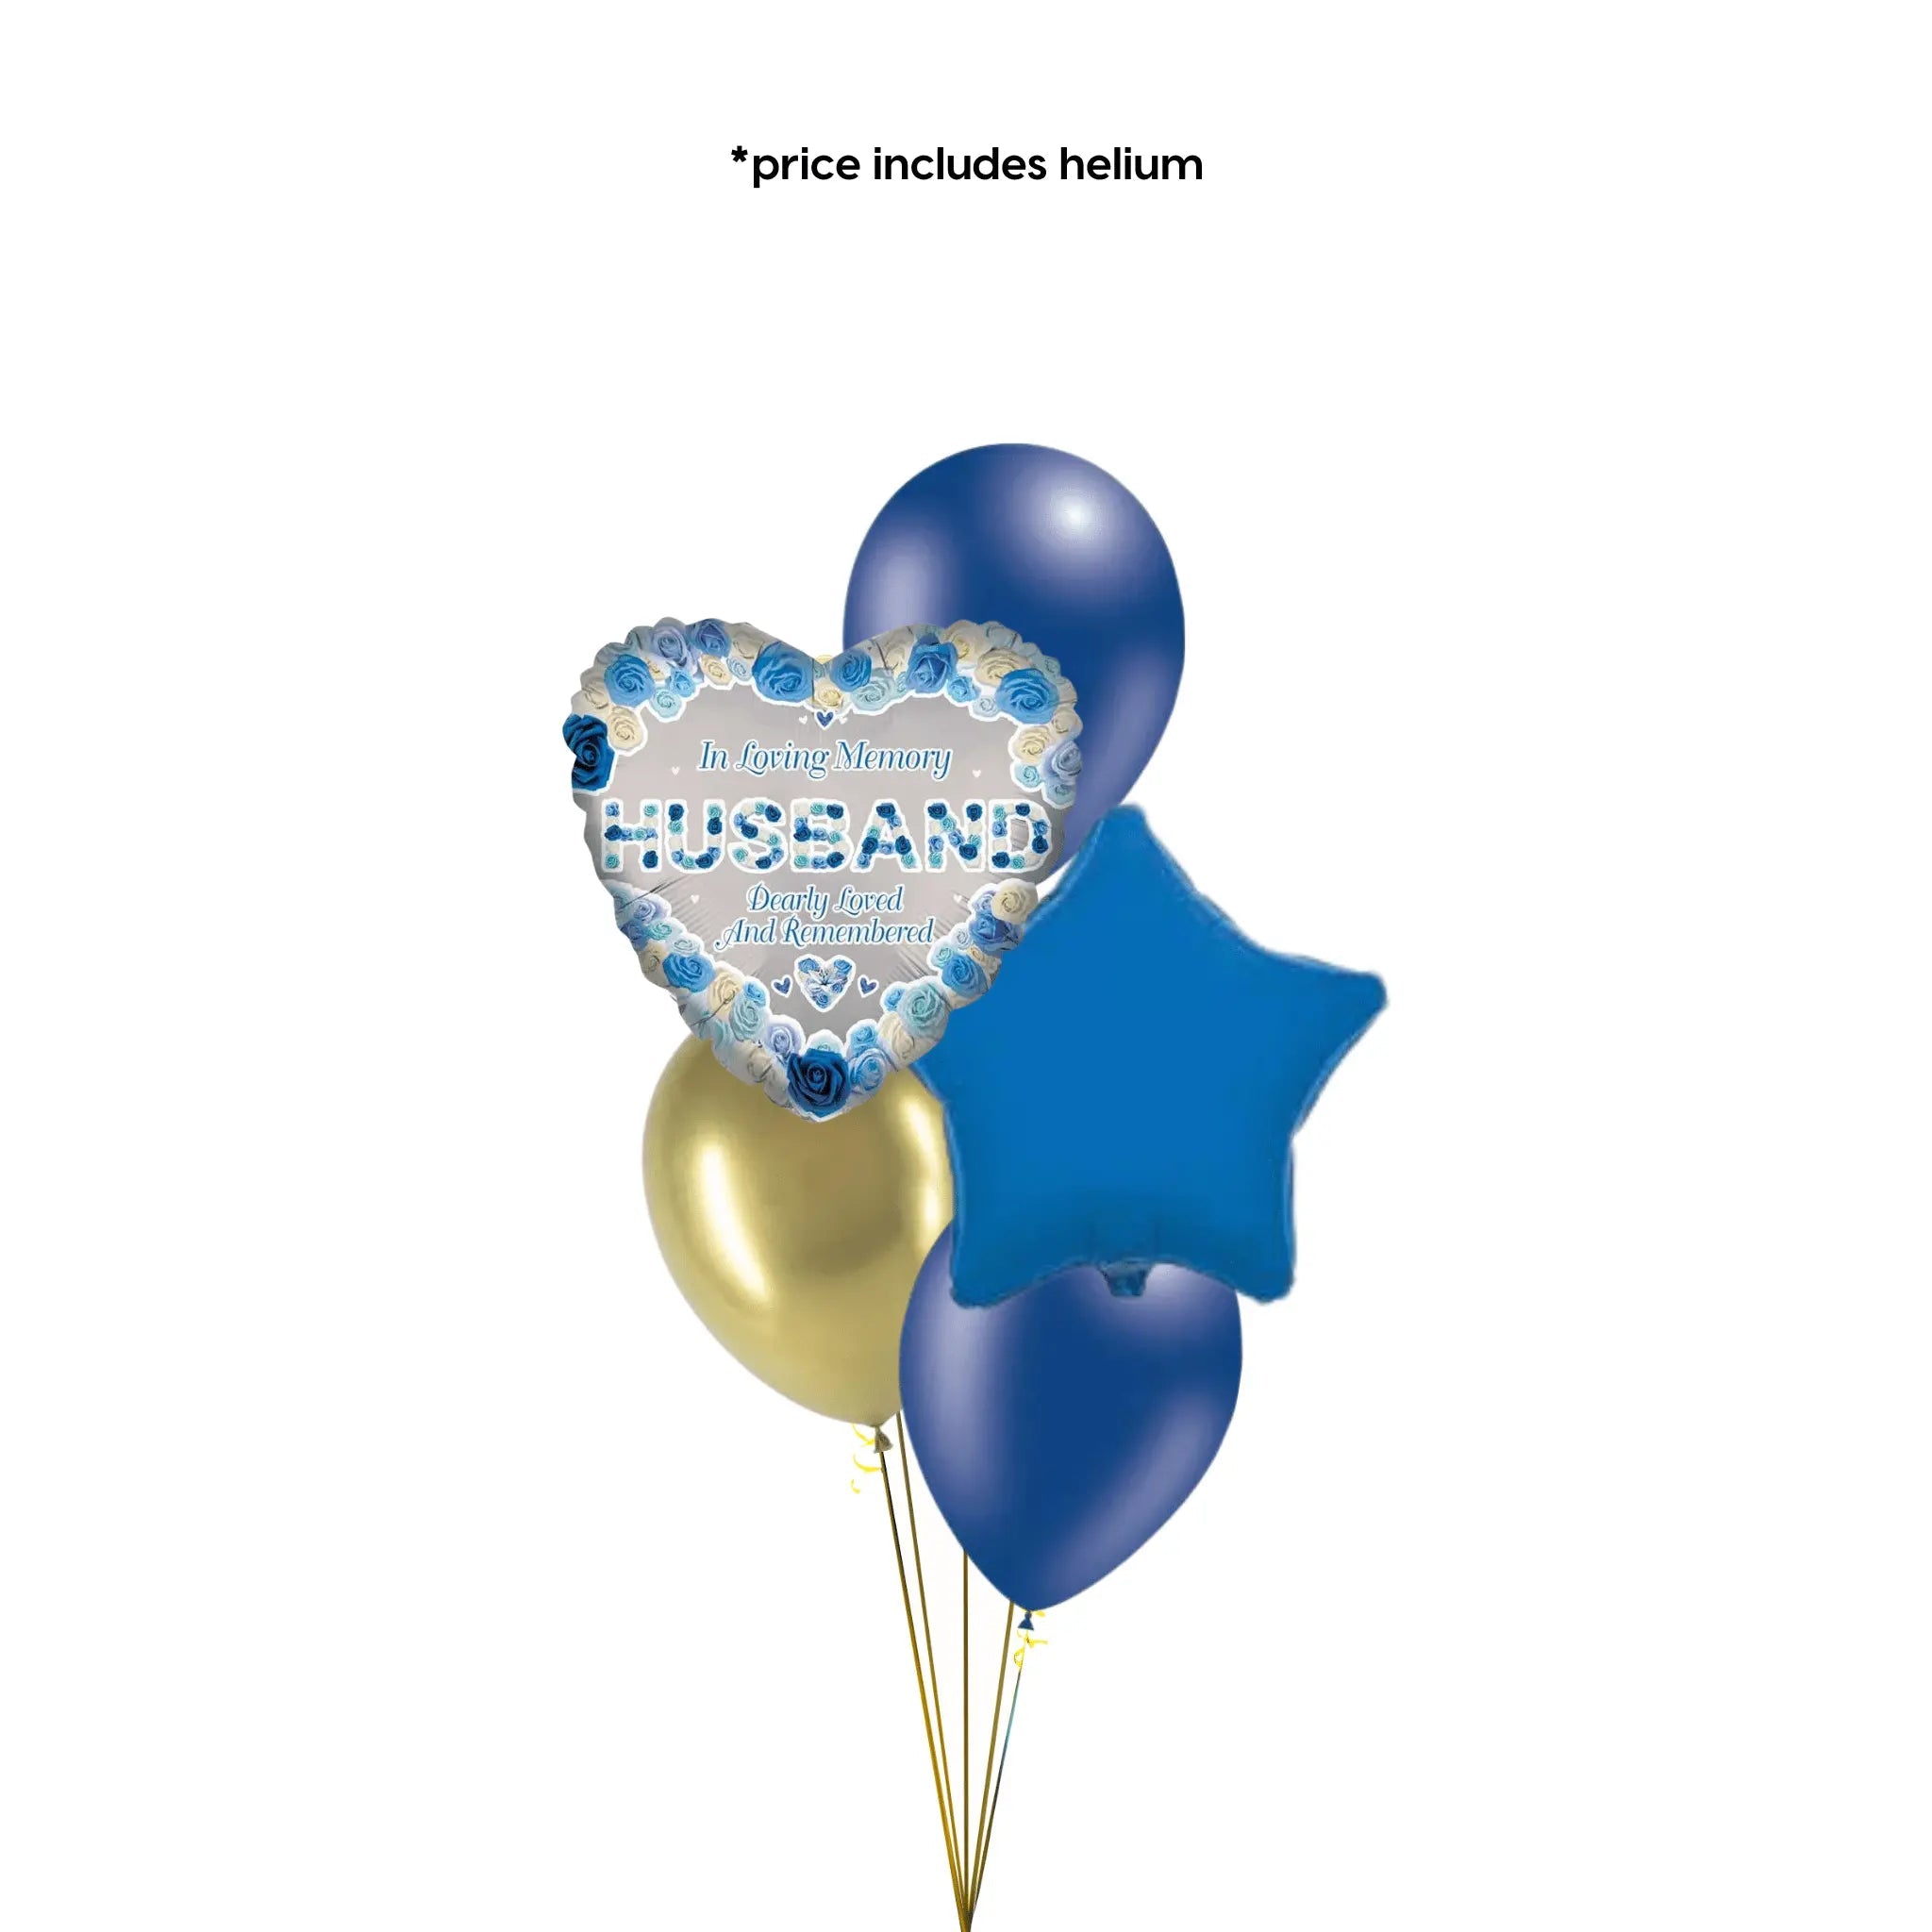 In Loving Memory (Husband) Balloon Bouquet | The Party Hut